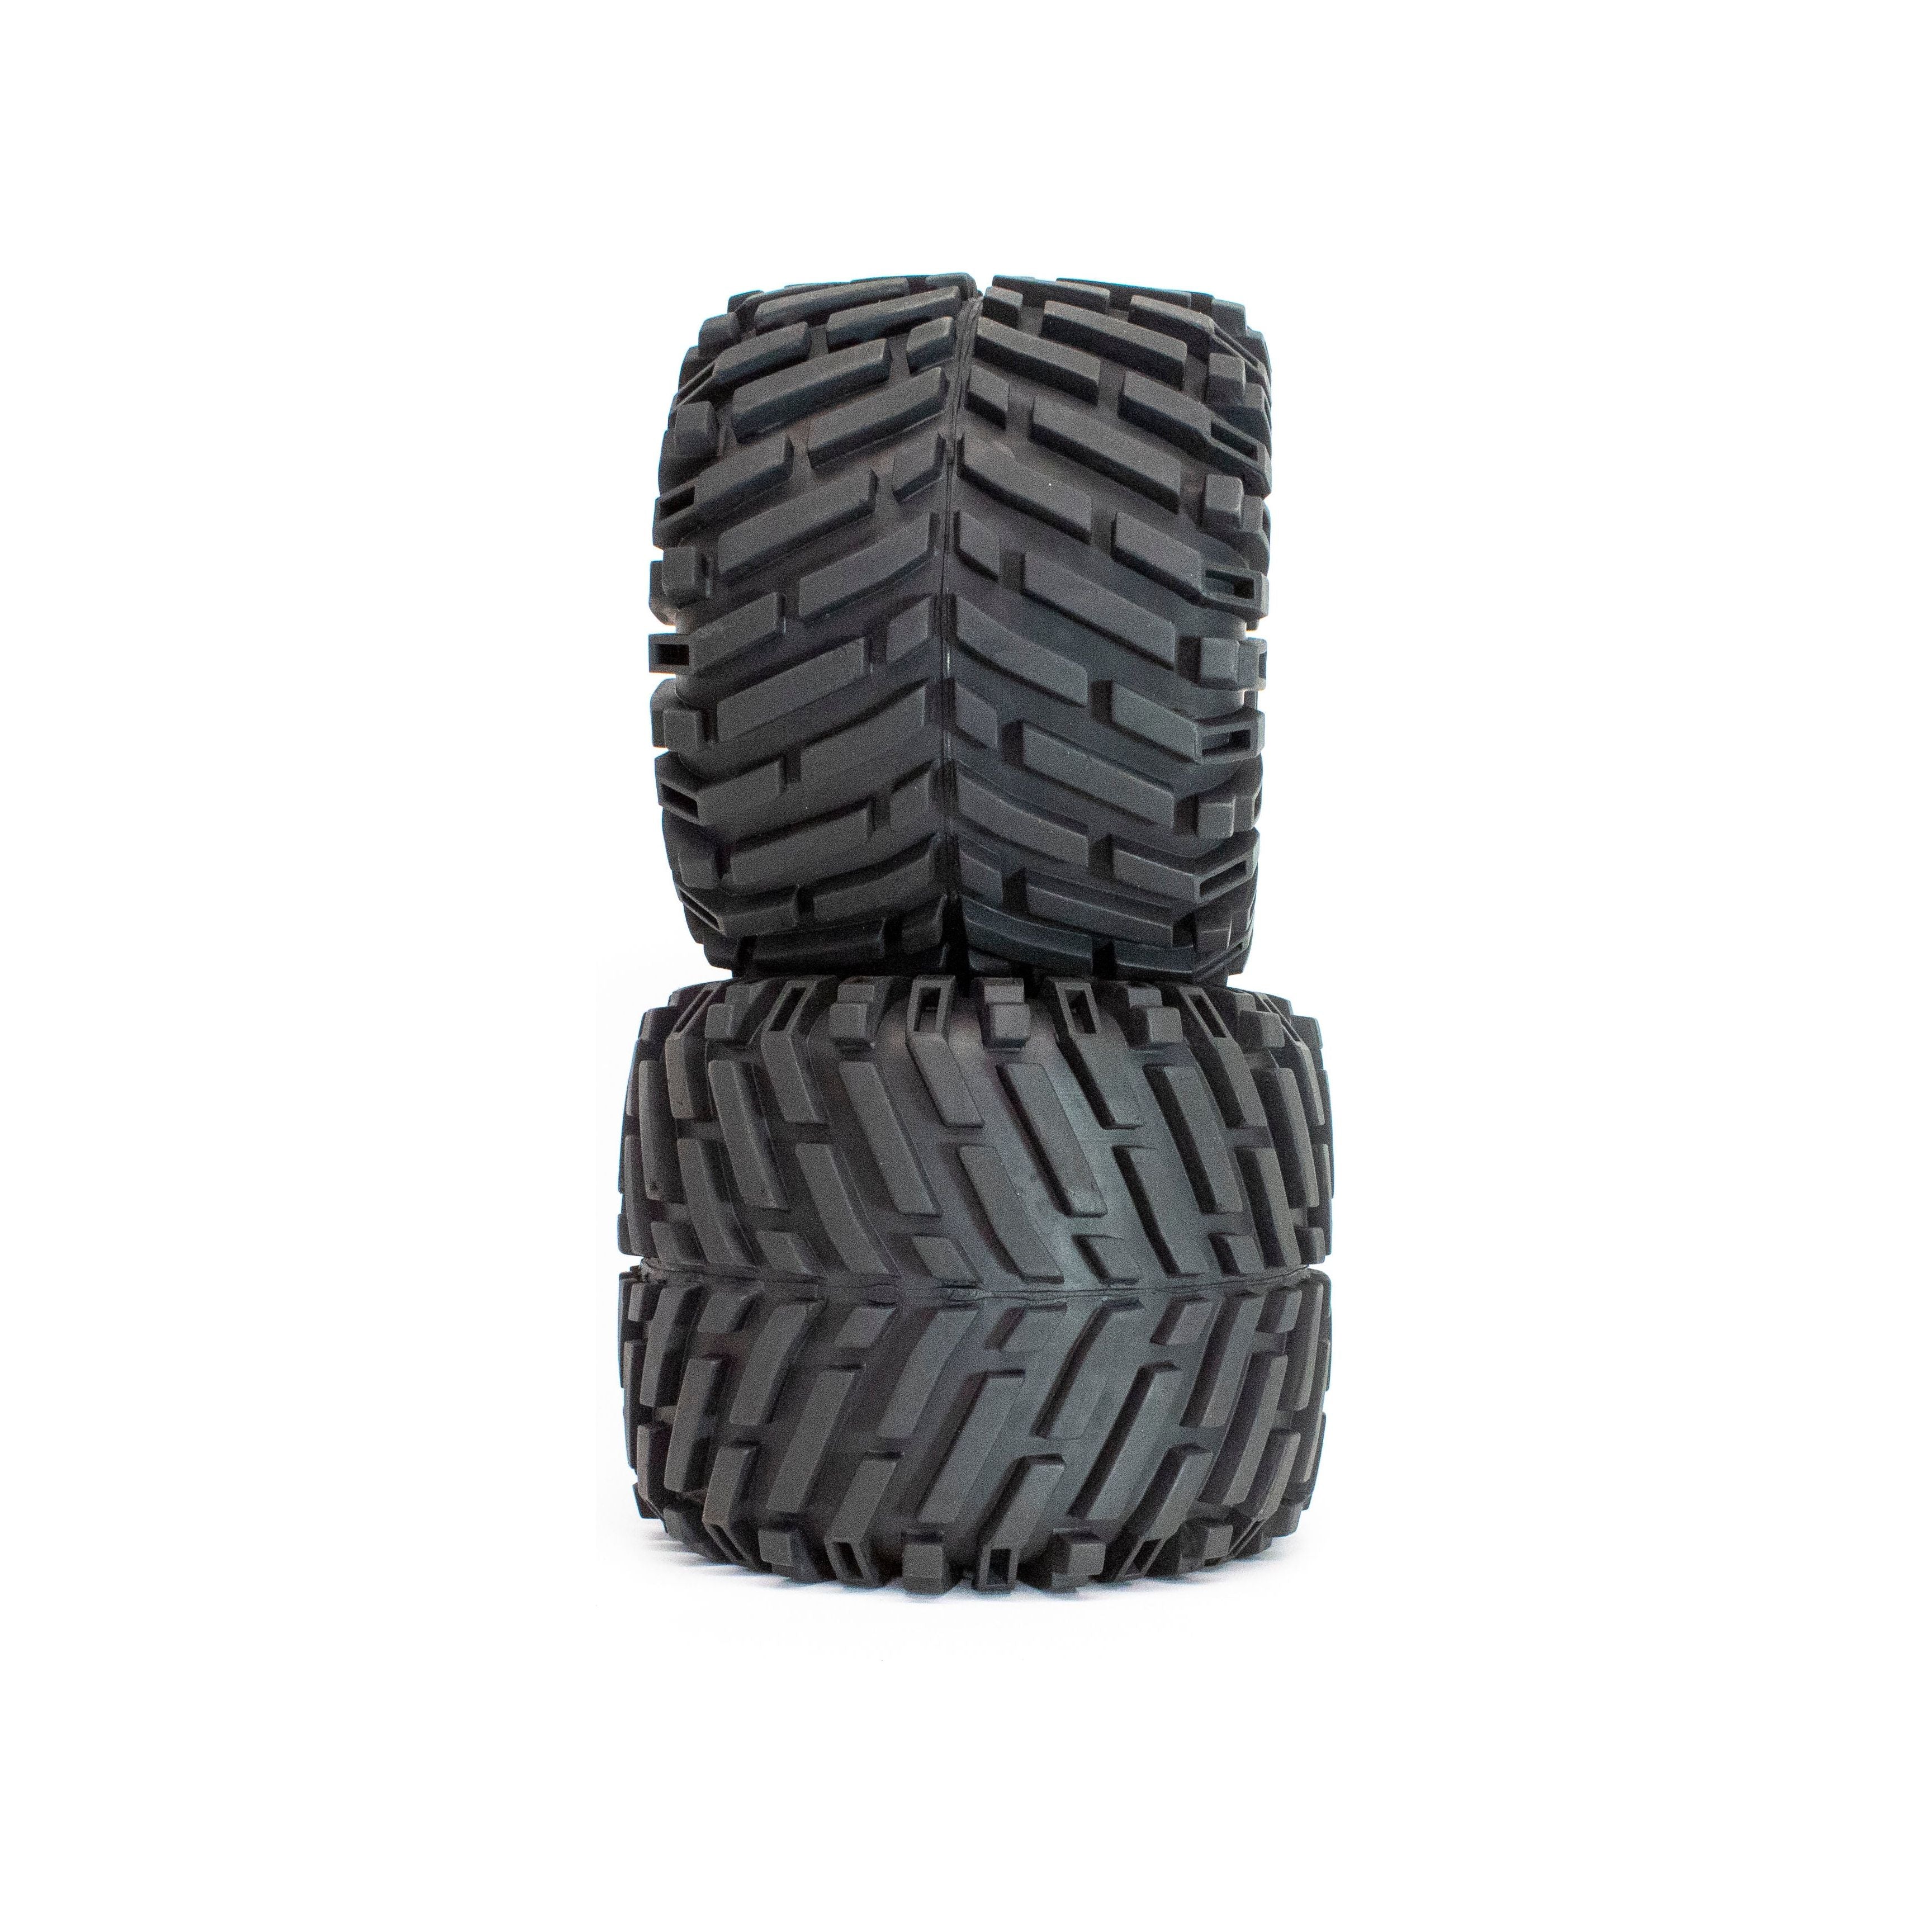 IMEX Jumbo Claw Dawg Monster Truck Tires (1 Pair)